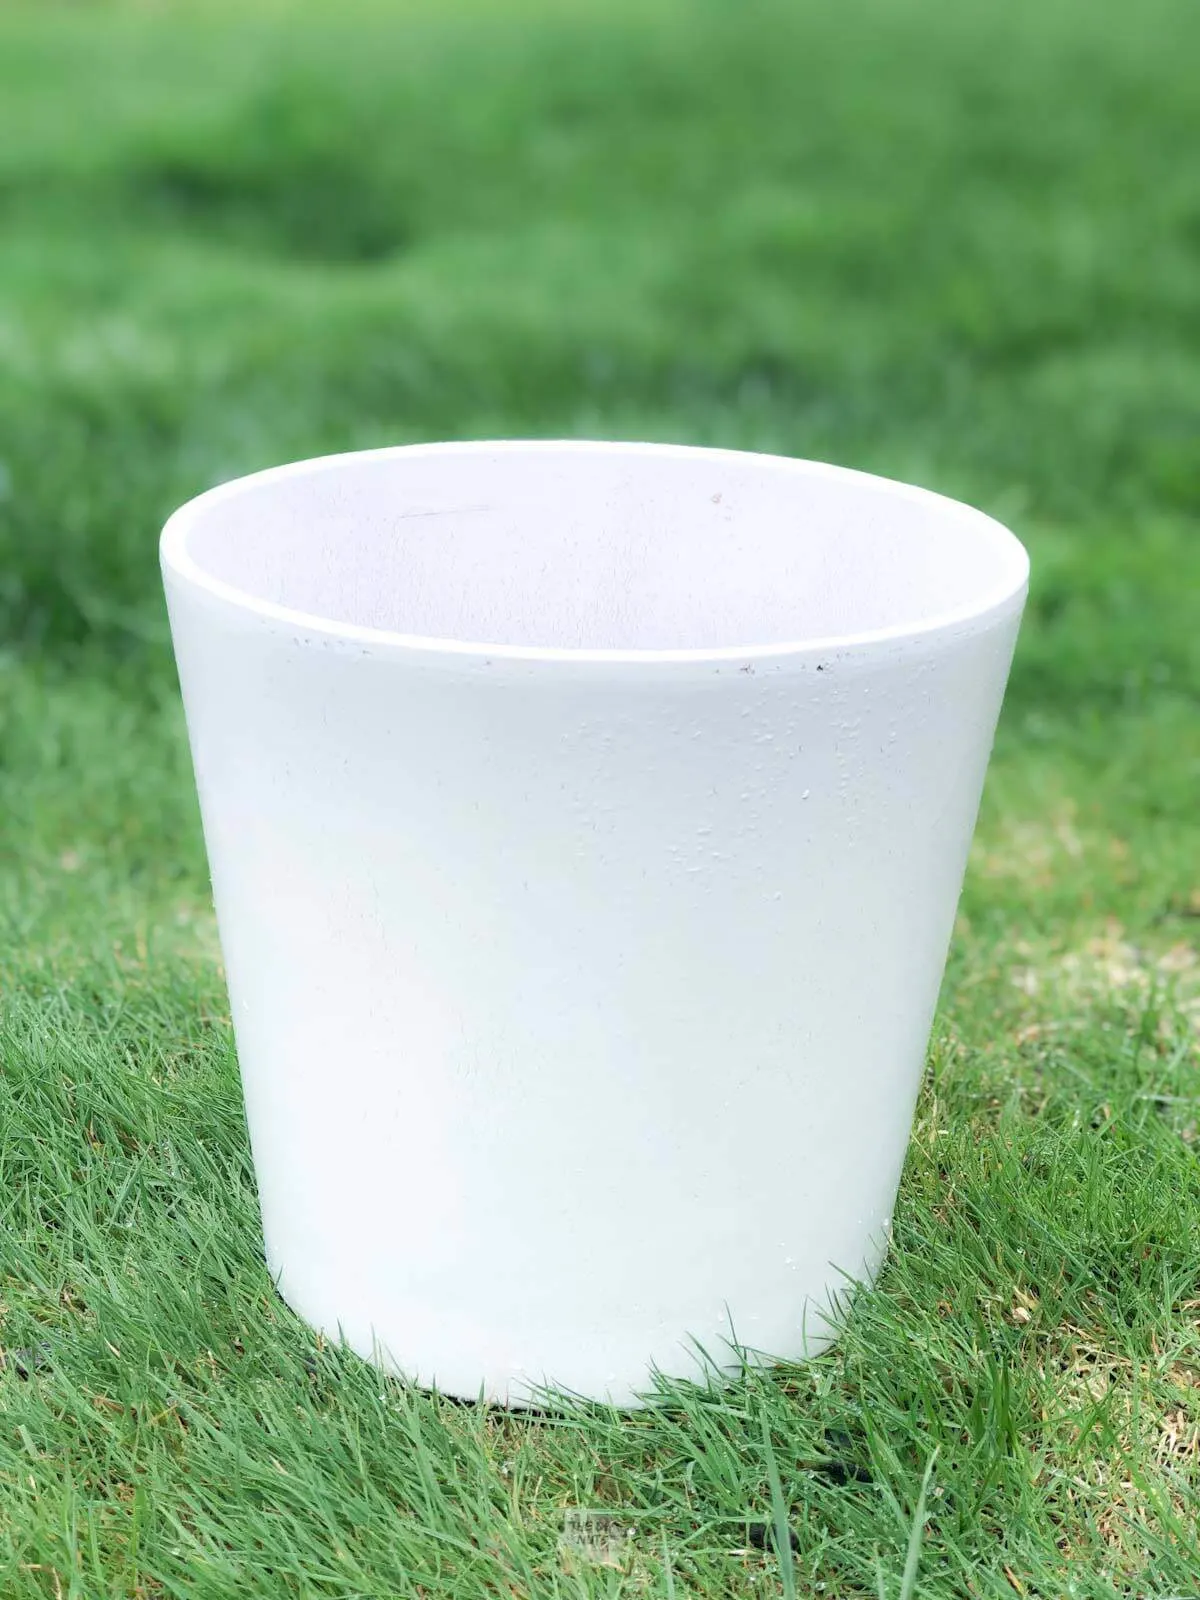 White spray painted terracotta pot sitting in grass.